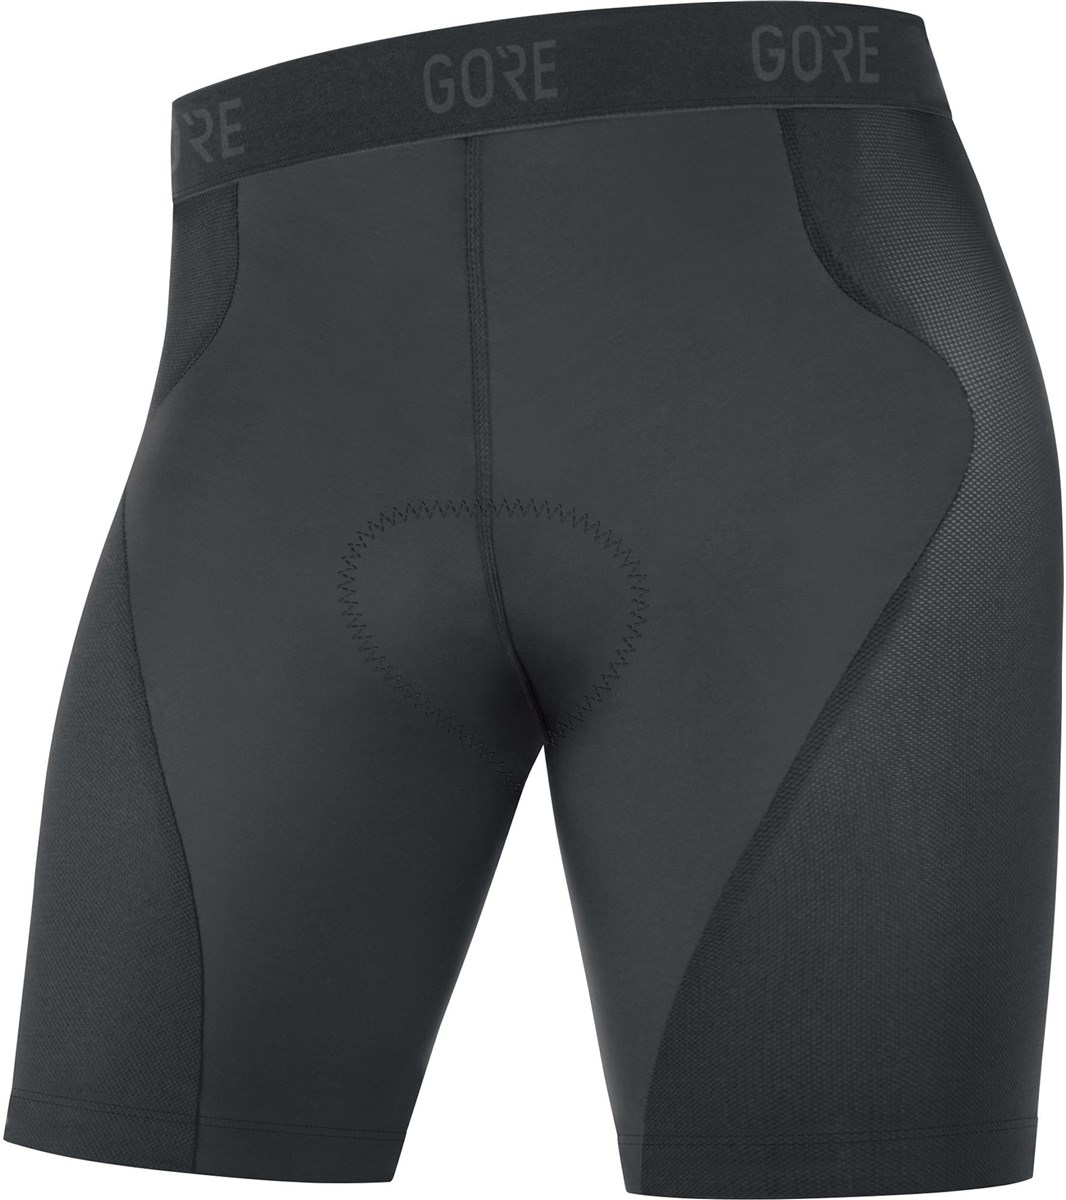 Gore C5 Liner Shorts product image